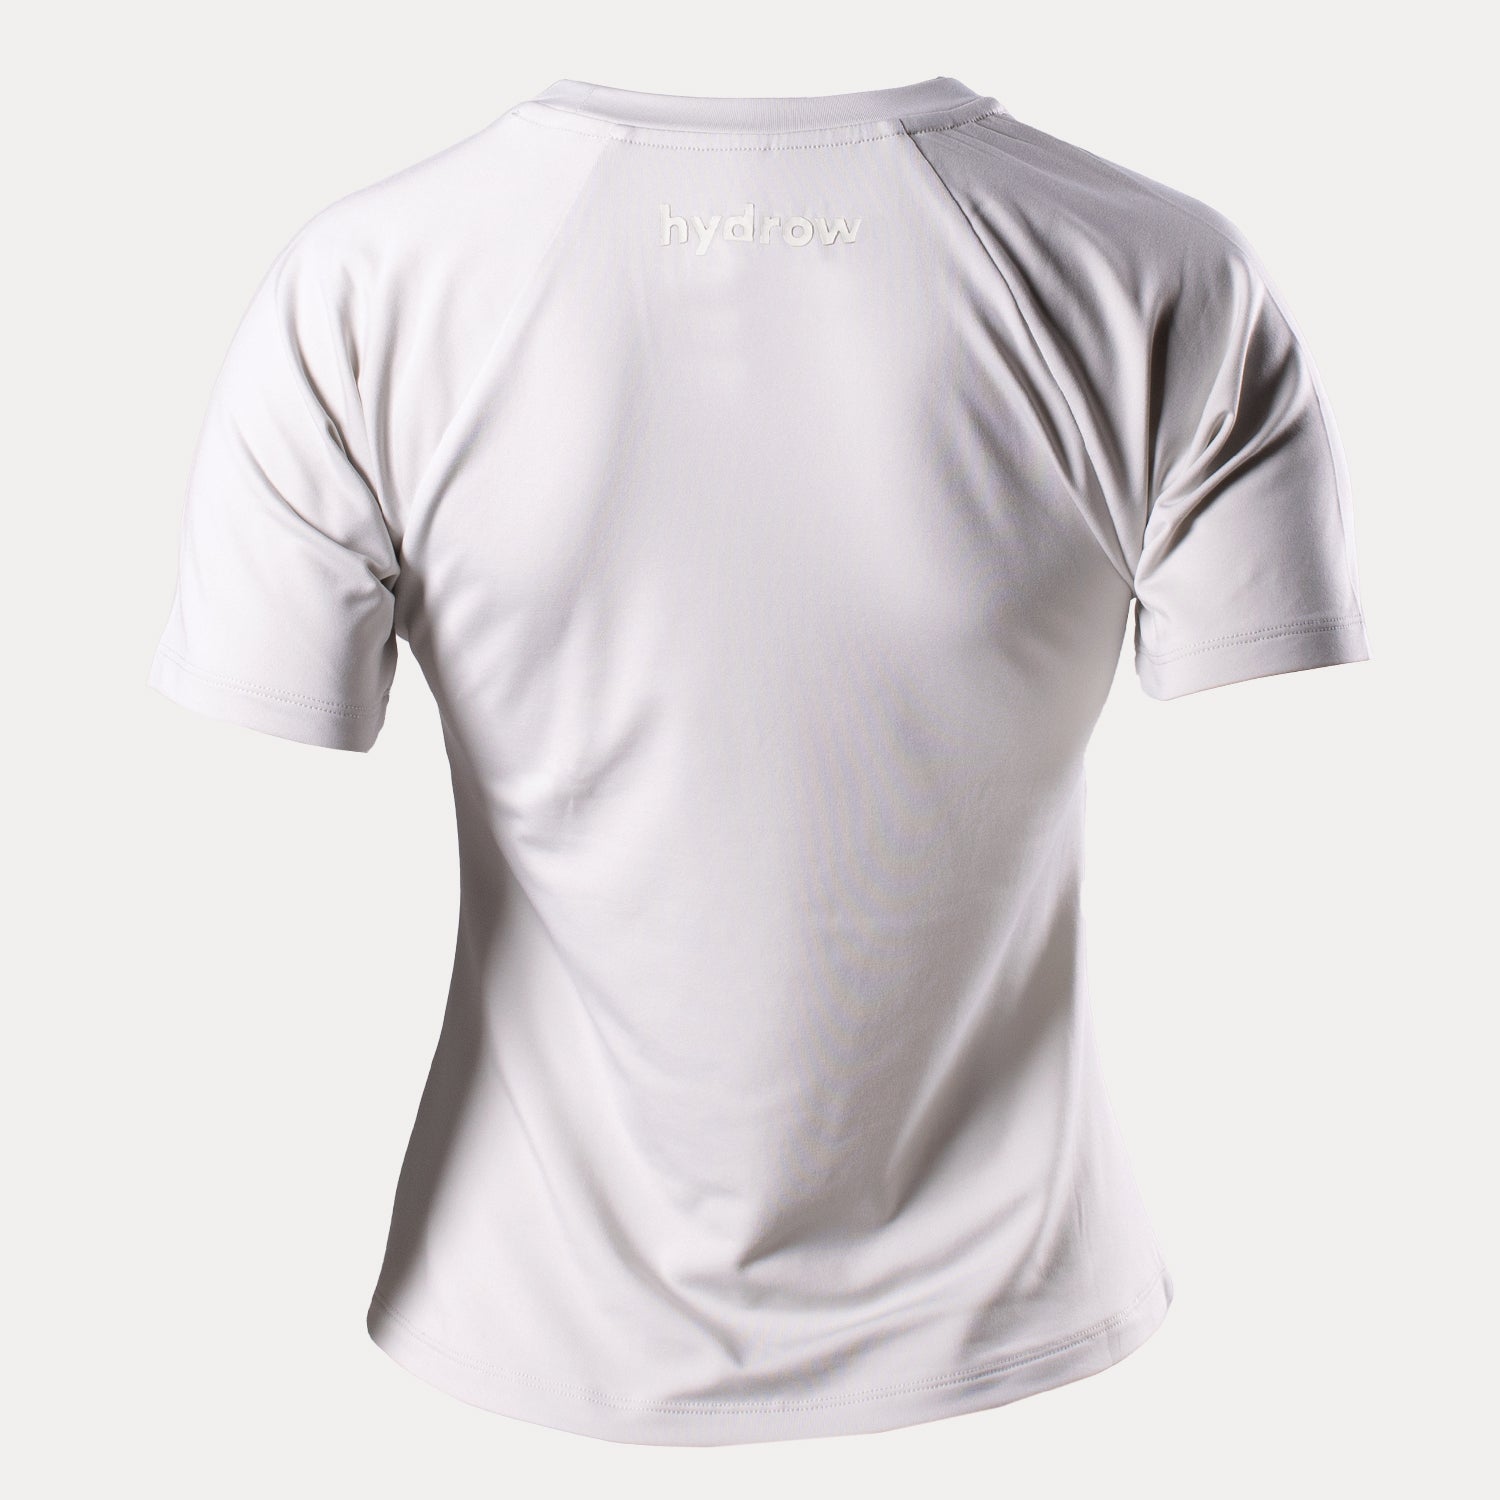 Women's Compression Shirt - Hydrow Apparel Store